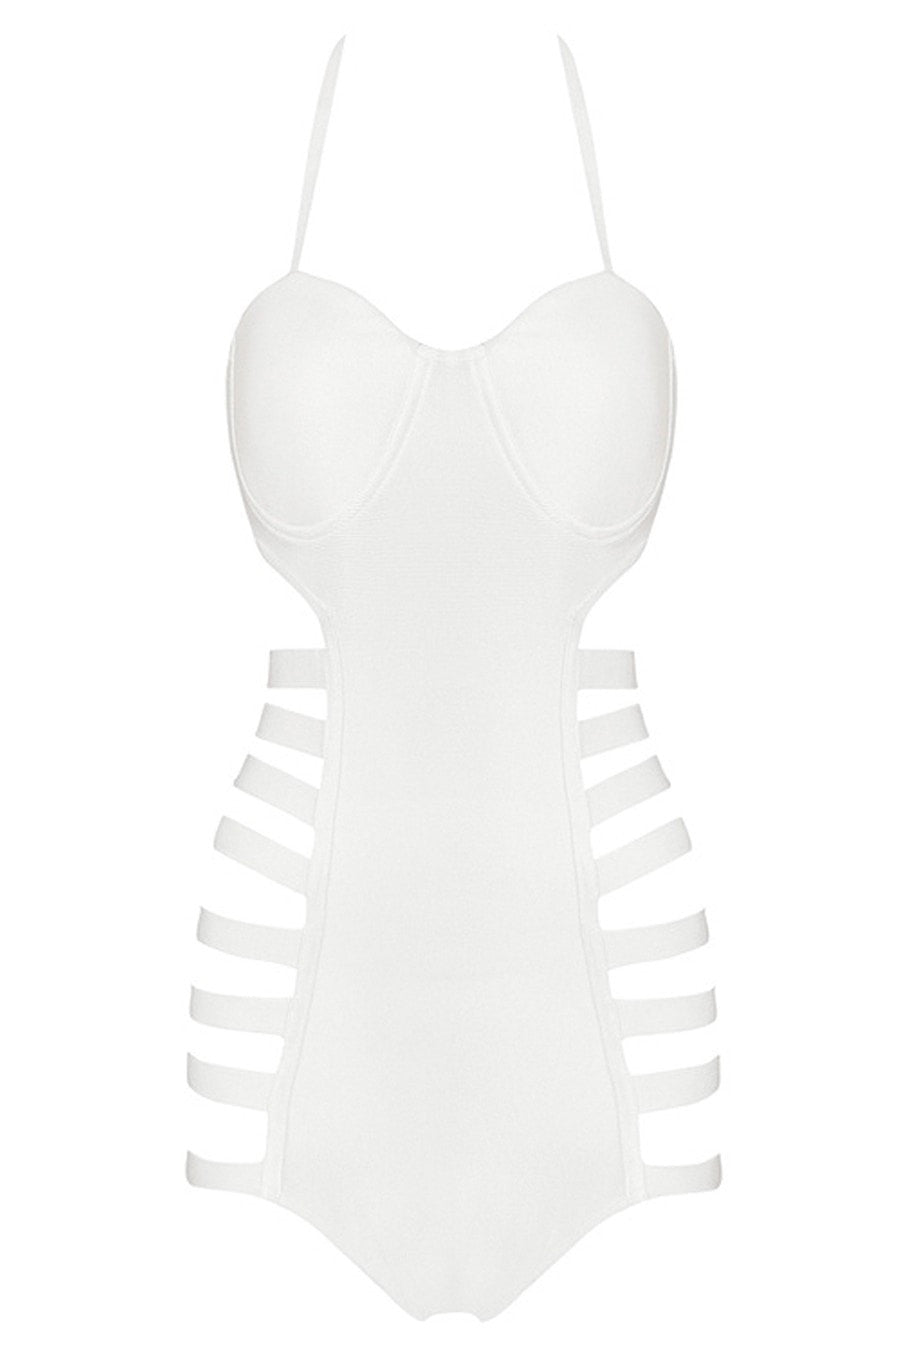 Honey Couture RORY White Bustier Halter Monokini Swimwear Honey Couture$ AfterPay Humm ZipPay LayBuy Sezzle